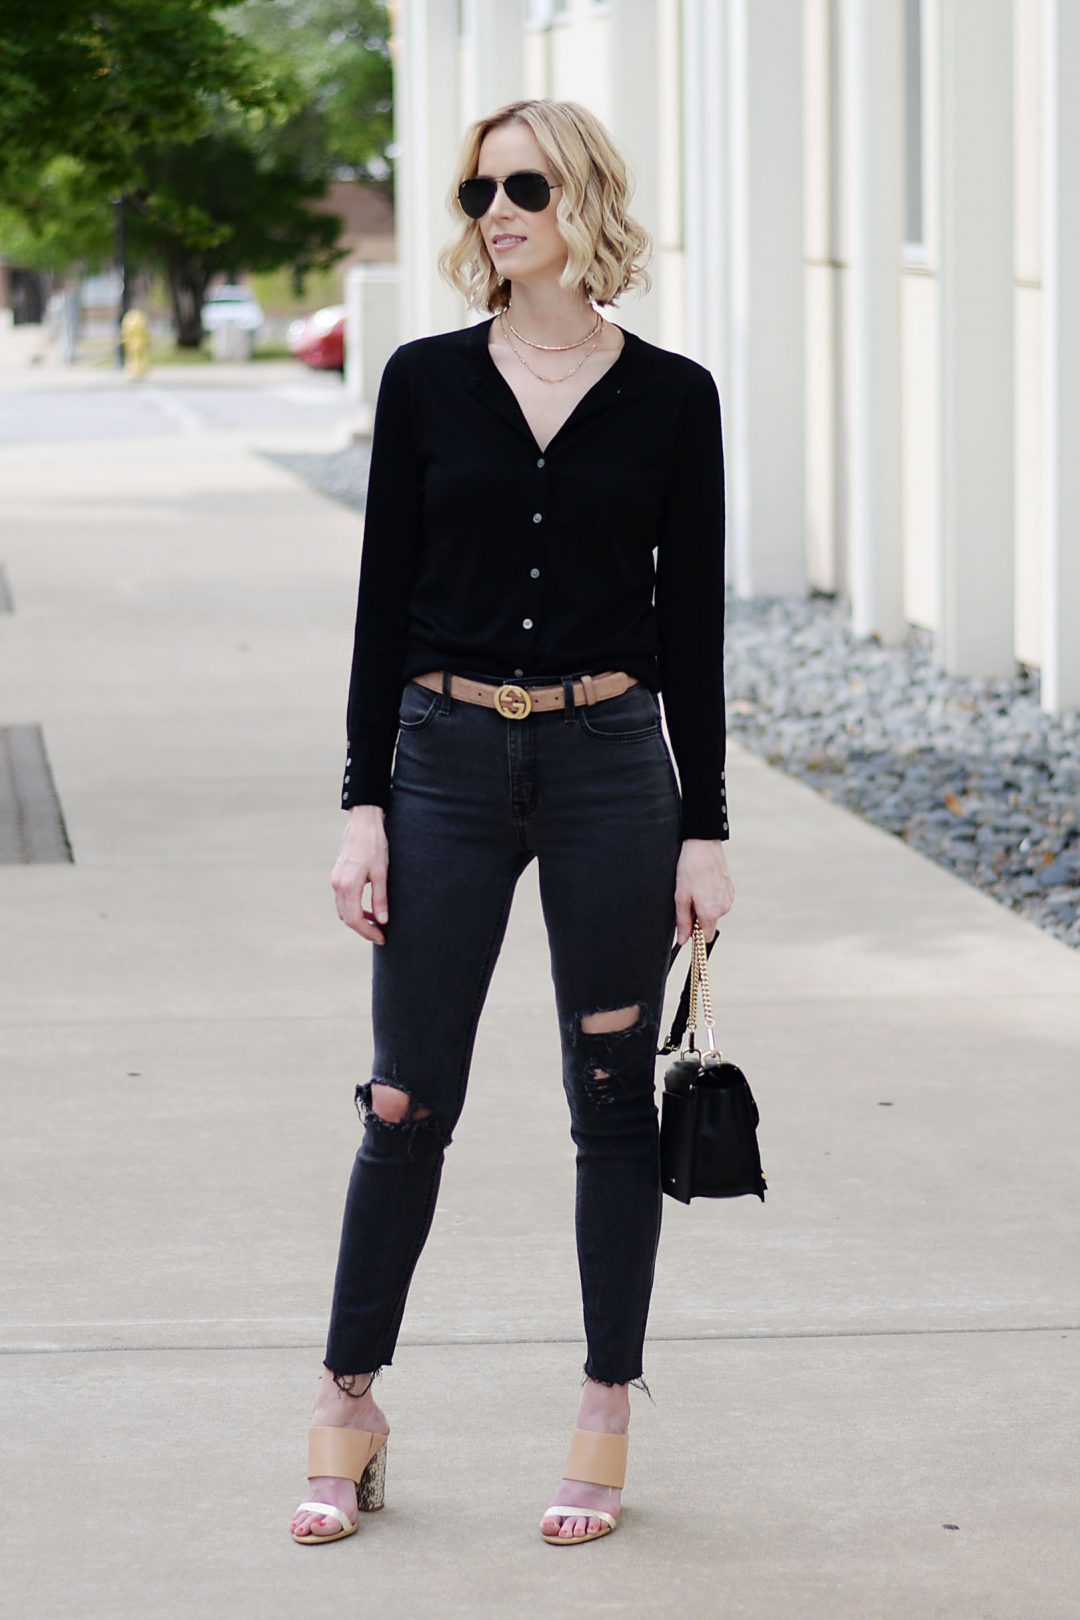 Wearing a Cardigan as a Top - Straight A Style